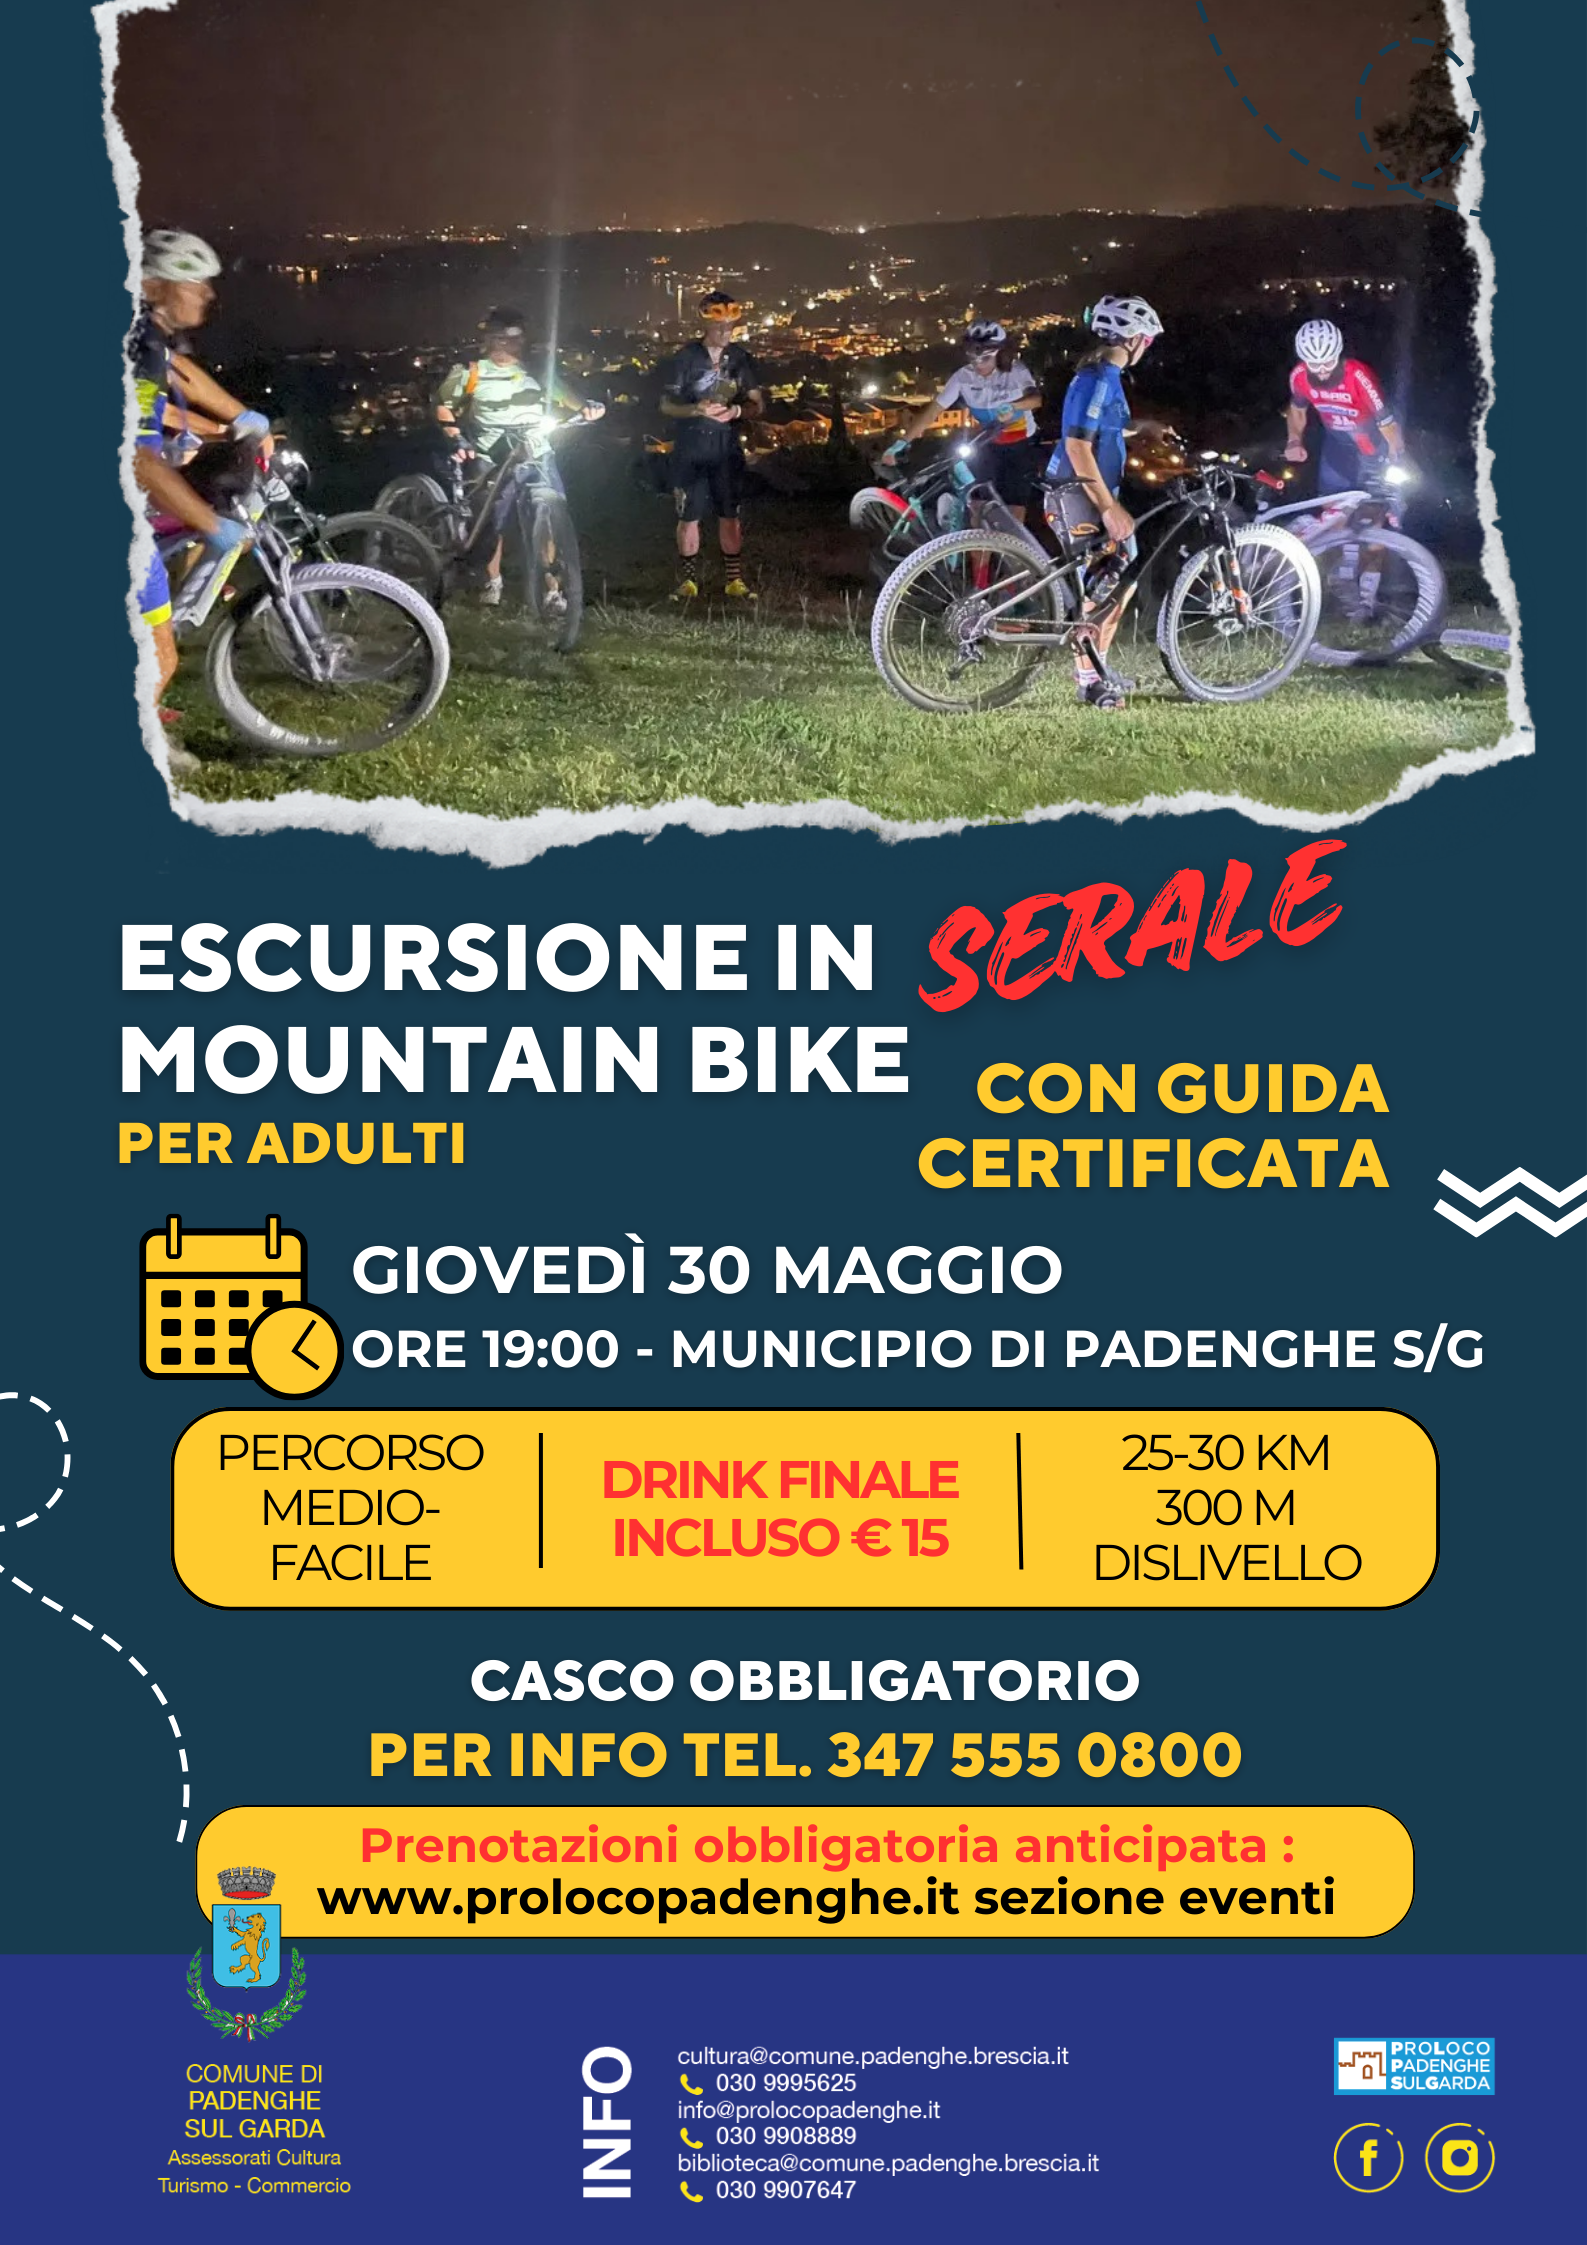 EVENING MOUNTAIN BIKE EXCURSION 30th MAY